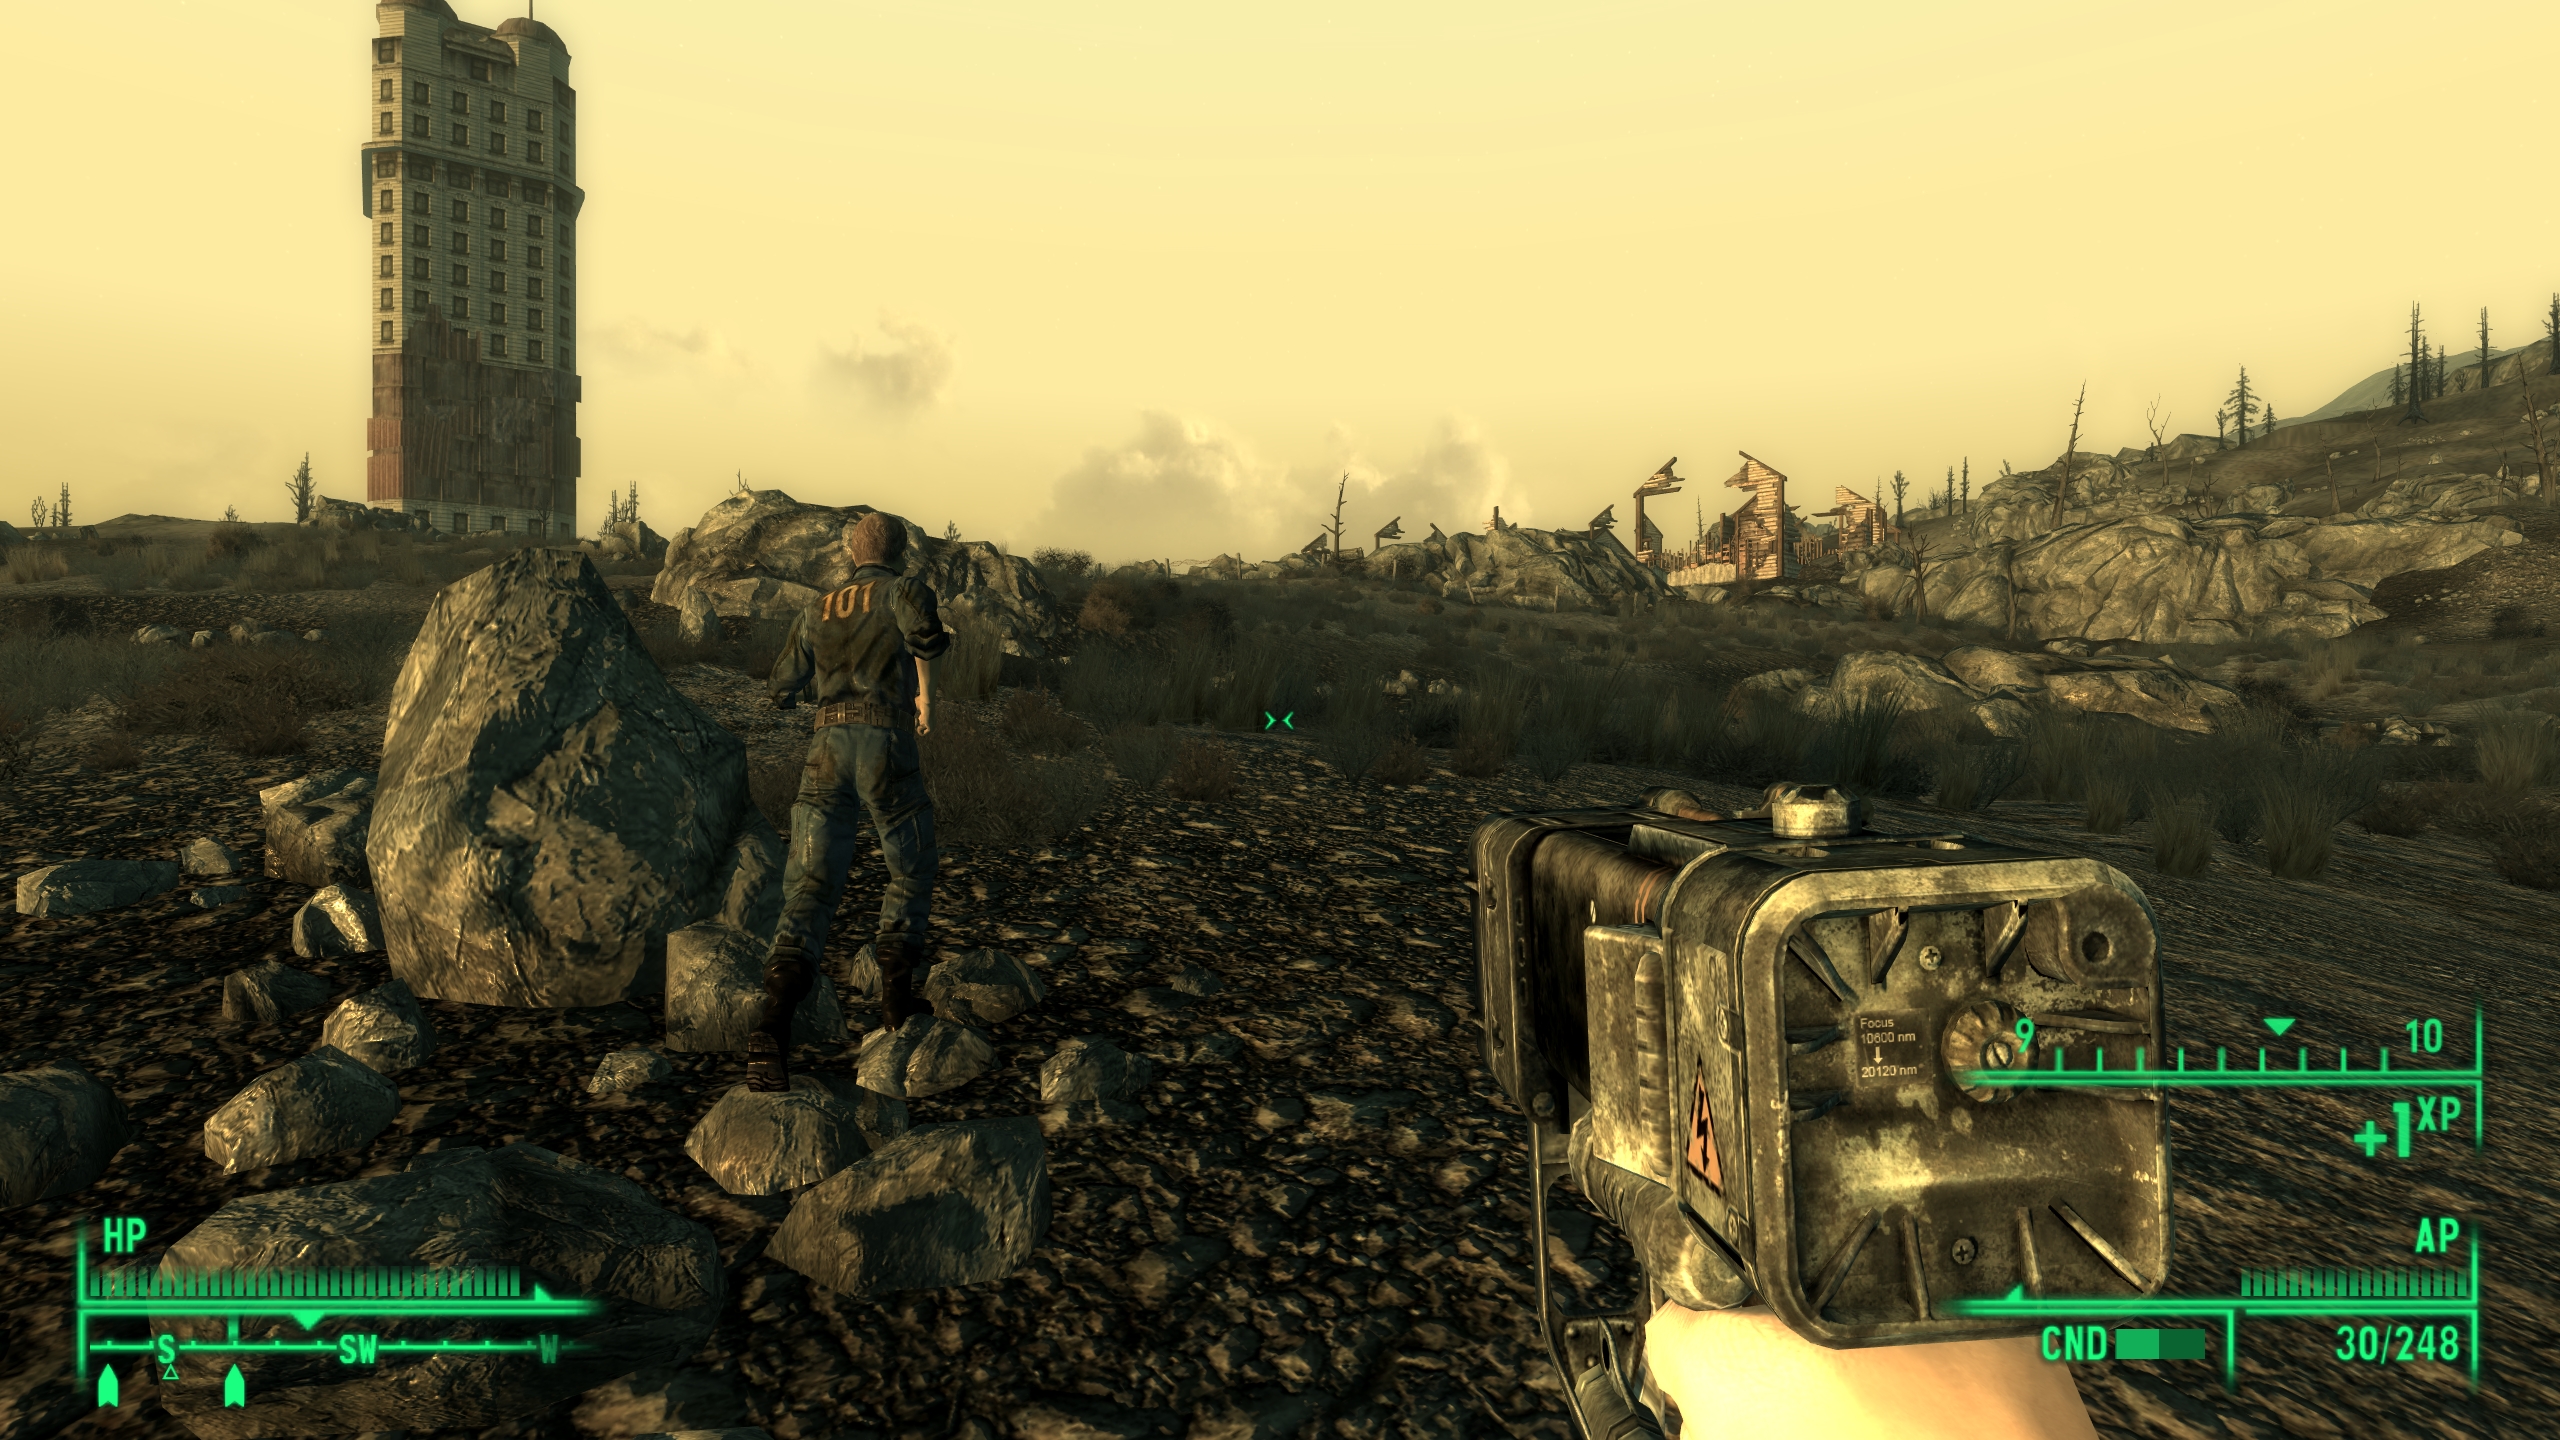 Jogging across the wasteland with your dad and an laser pistol